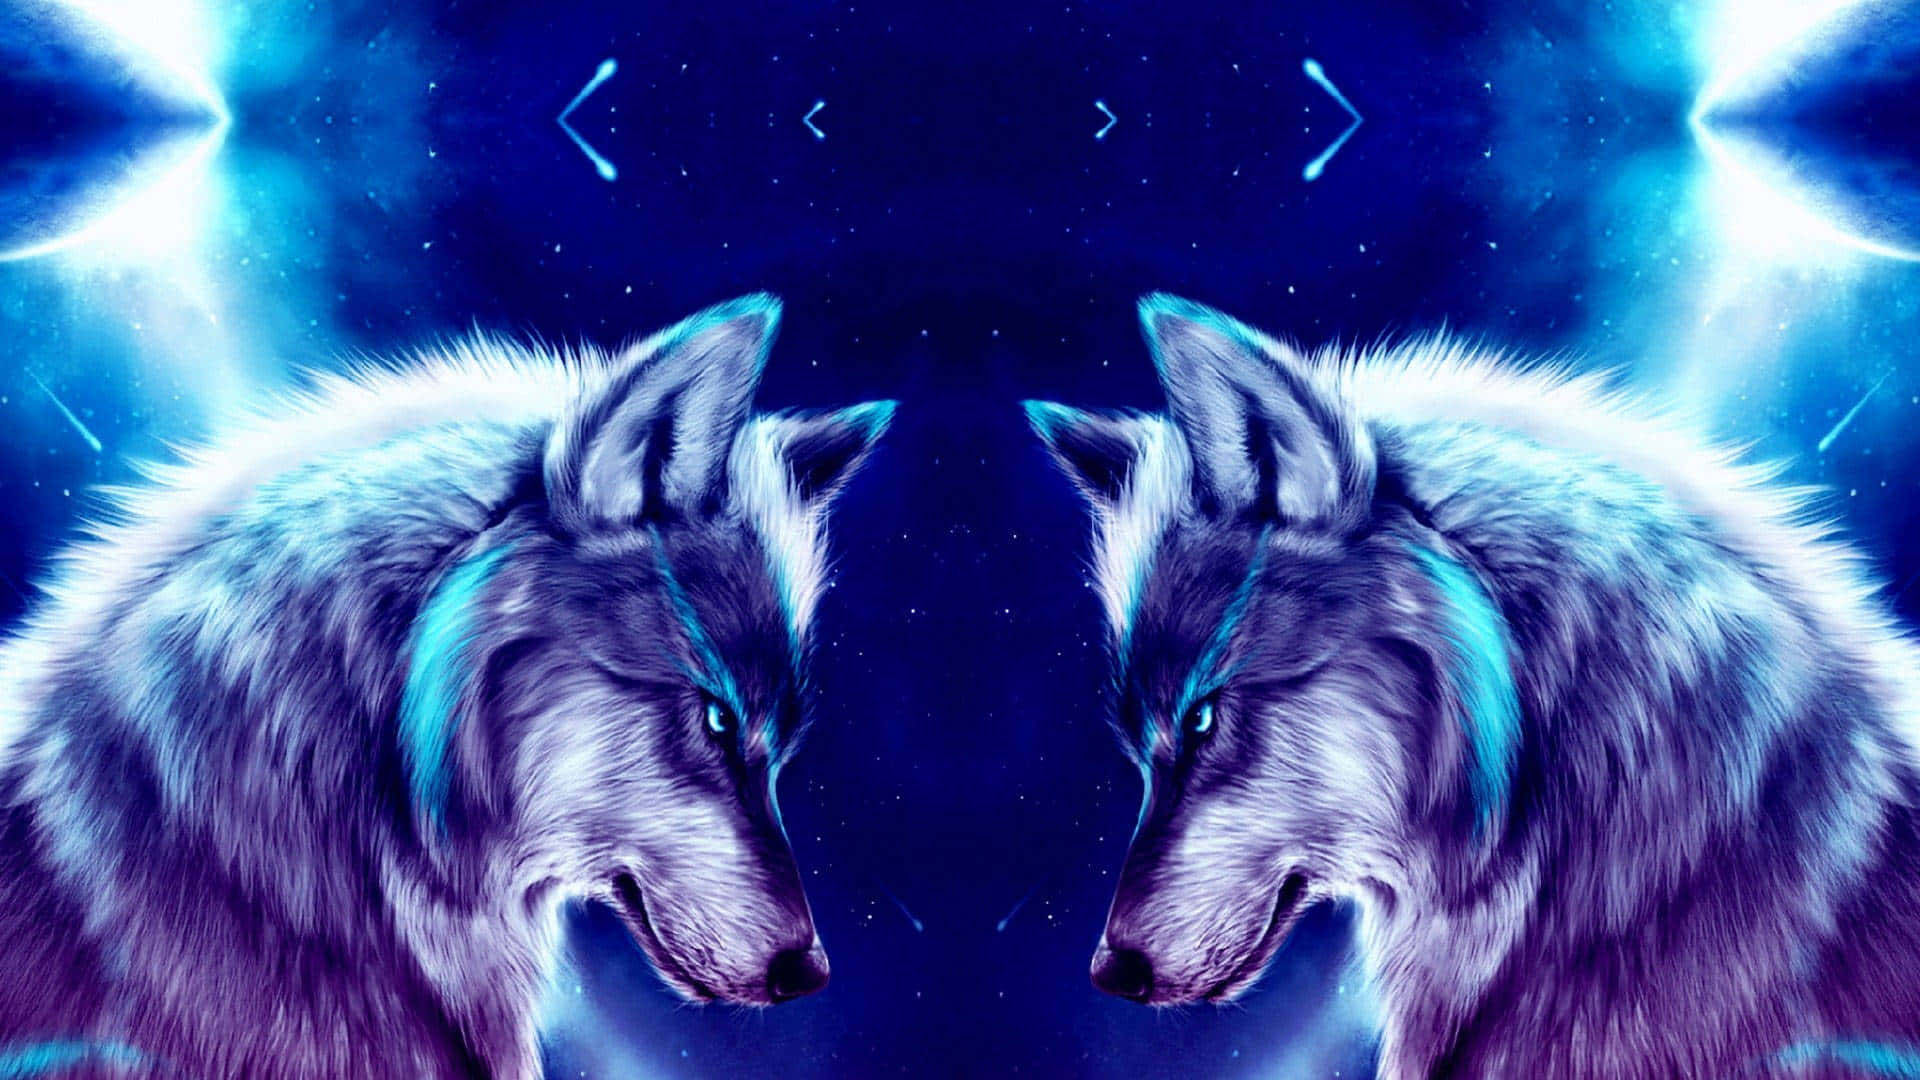 Two Wolves In The Night Sky